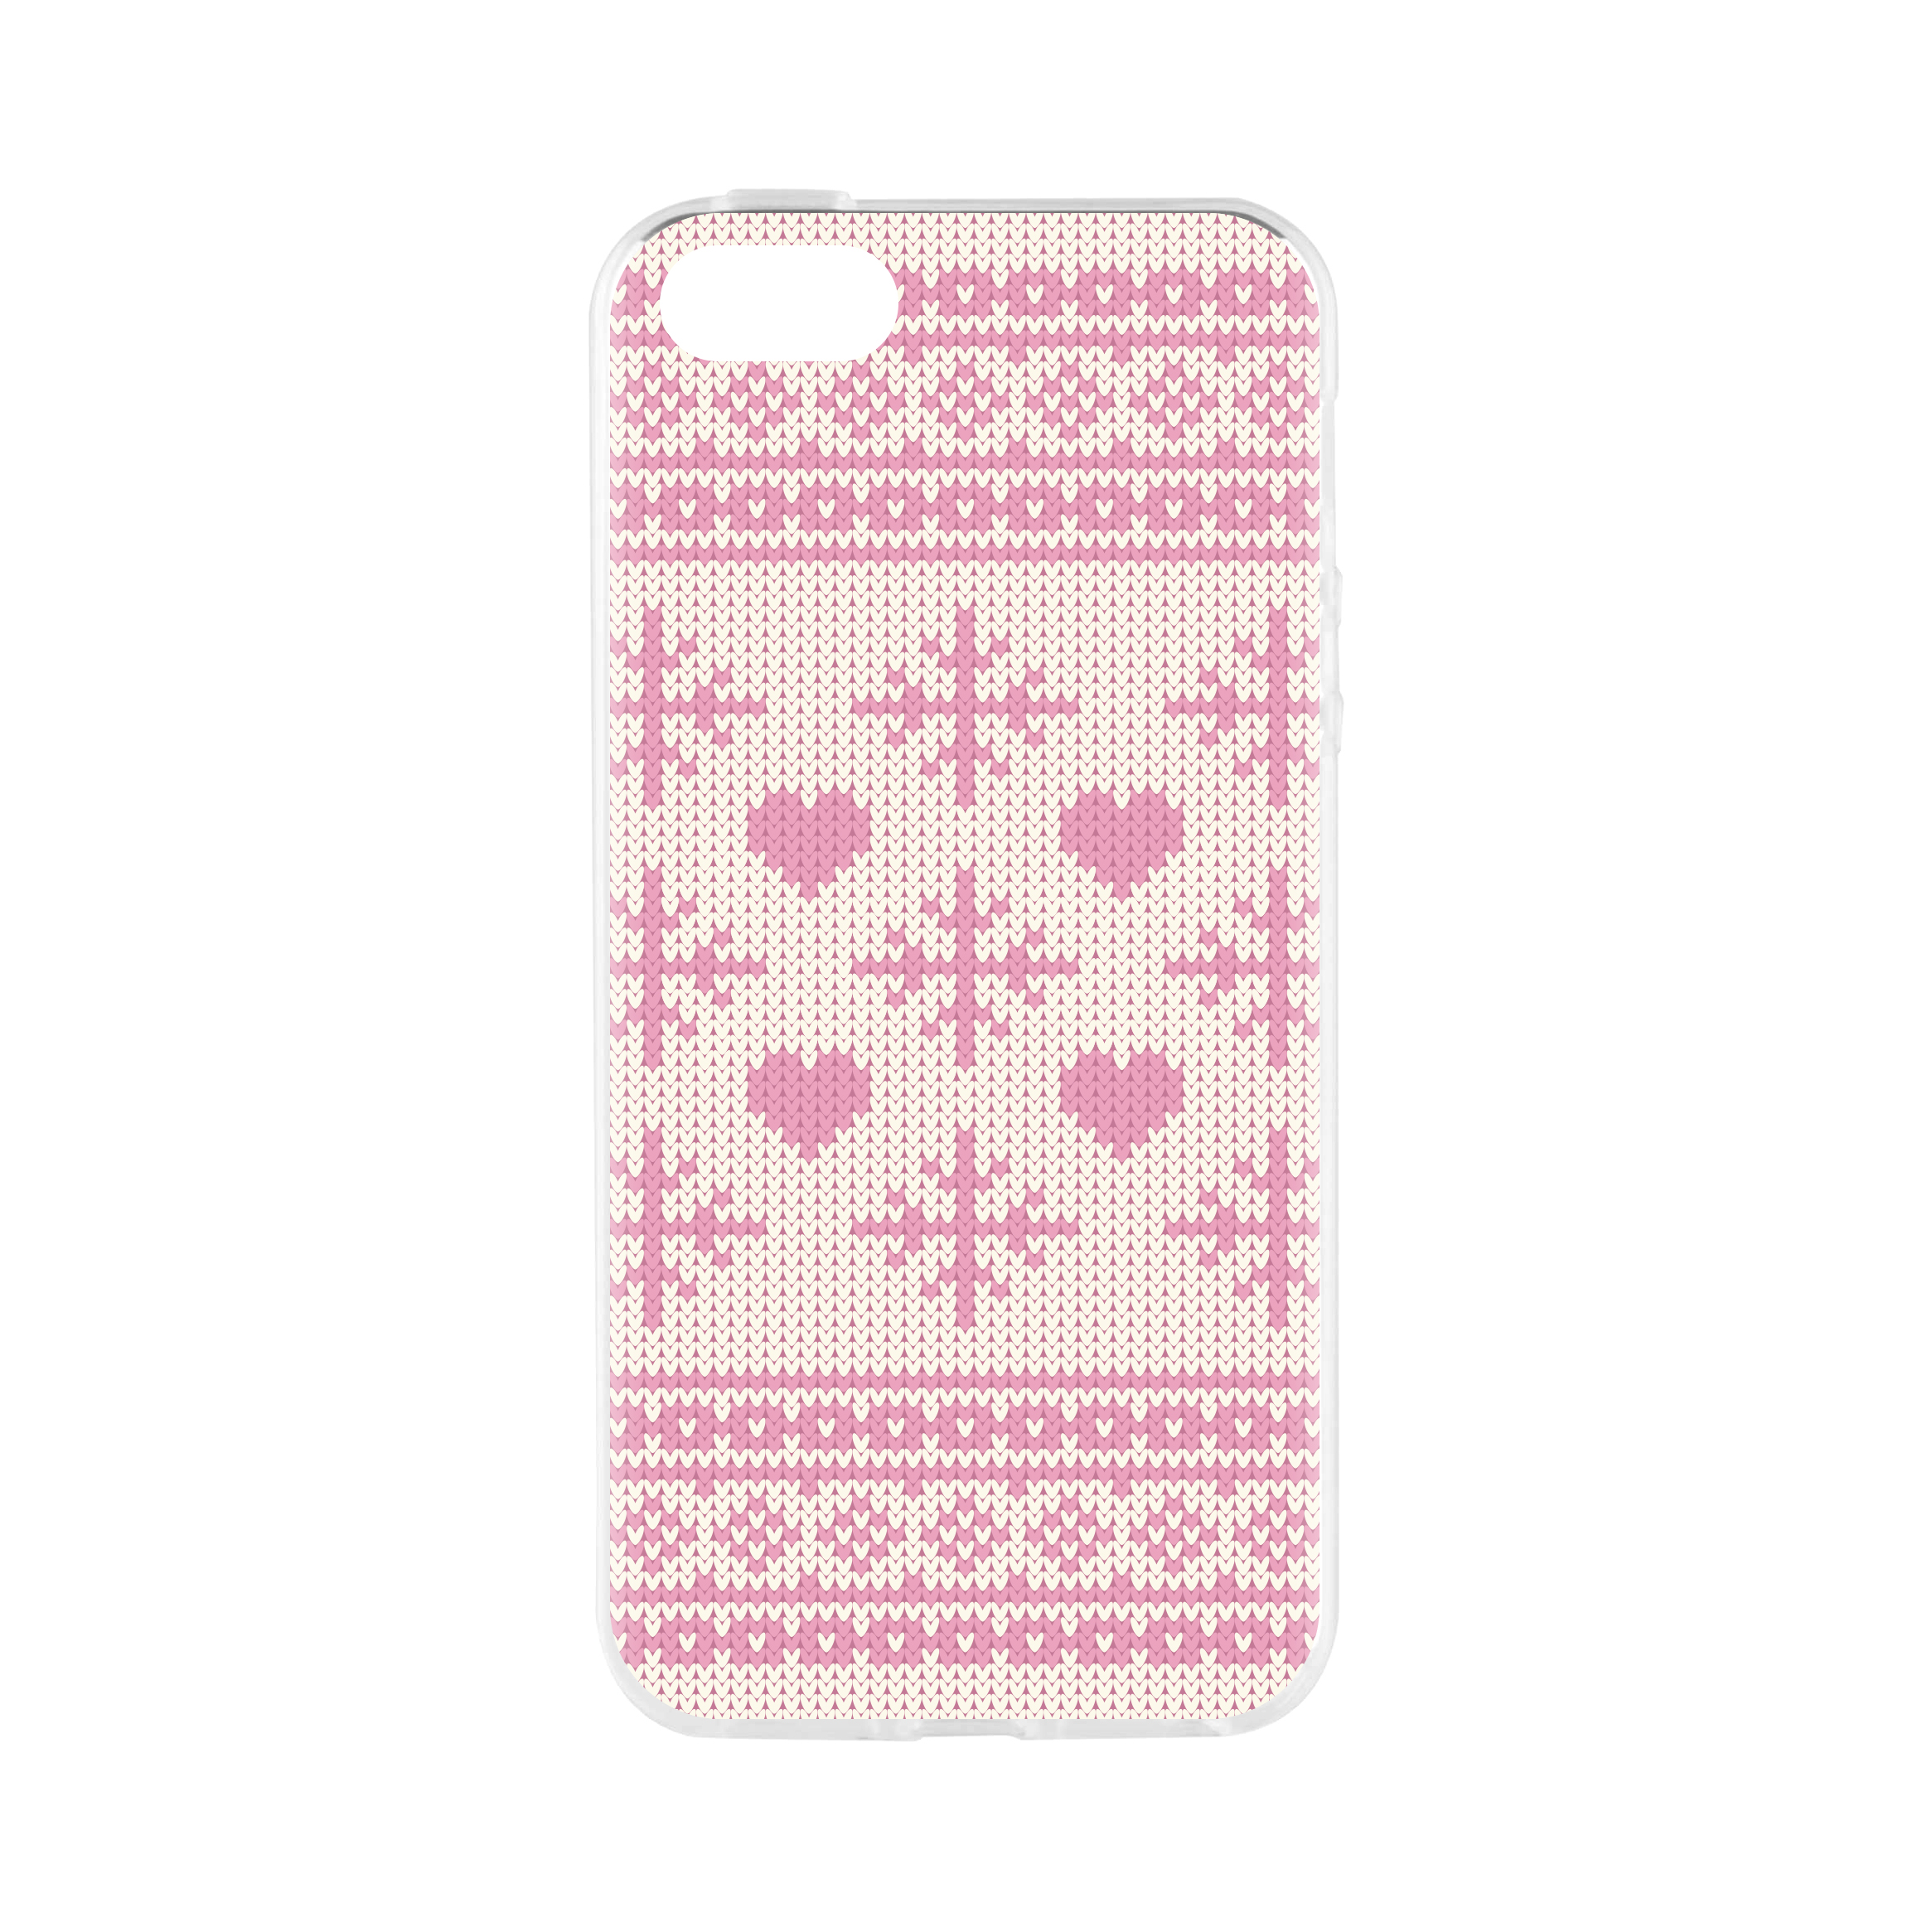 FLAVR Cardcase IPHONE Backcover, Sweater, APPLE, Xmas 5/5S/SE, PINK Ugly